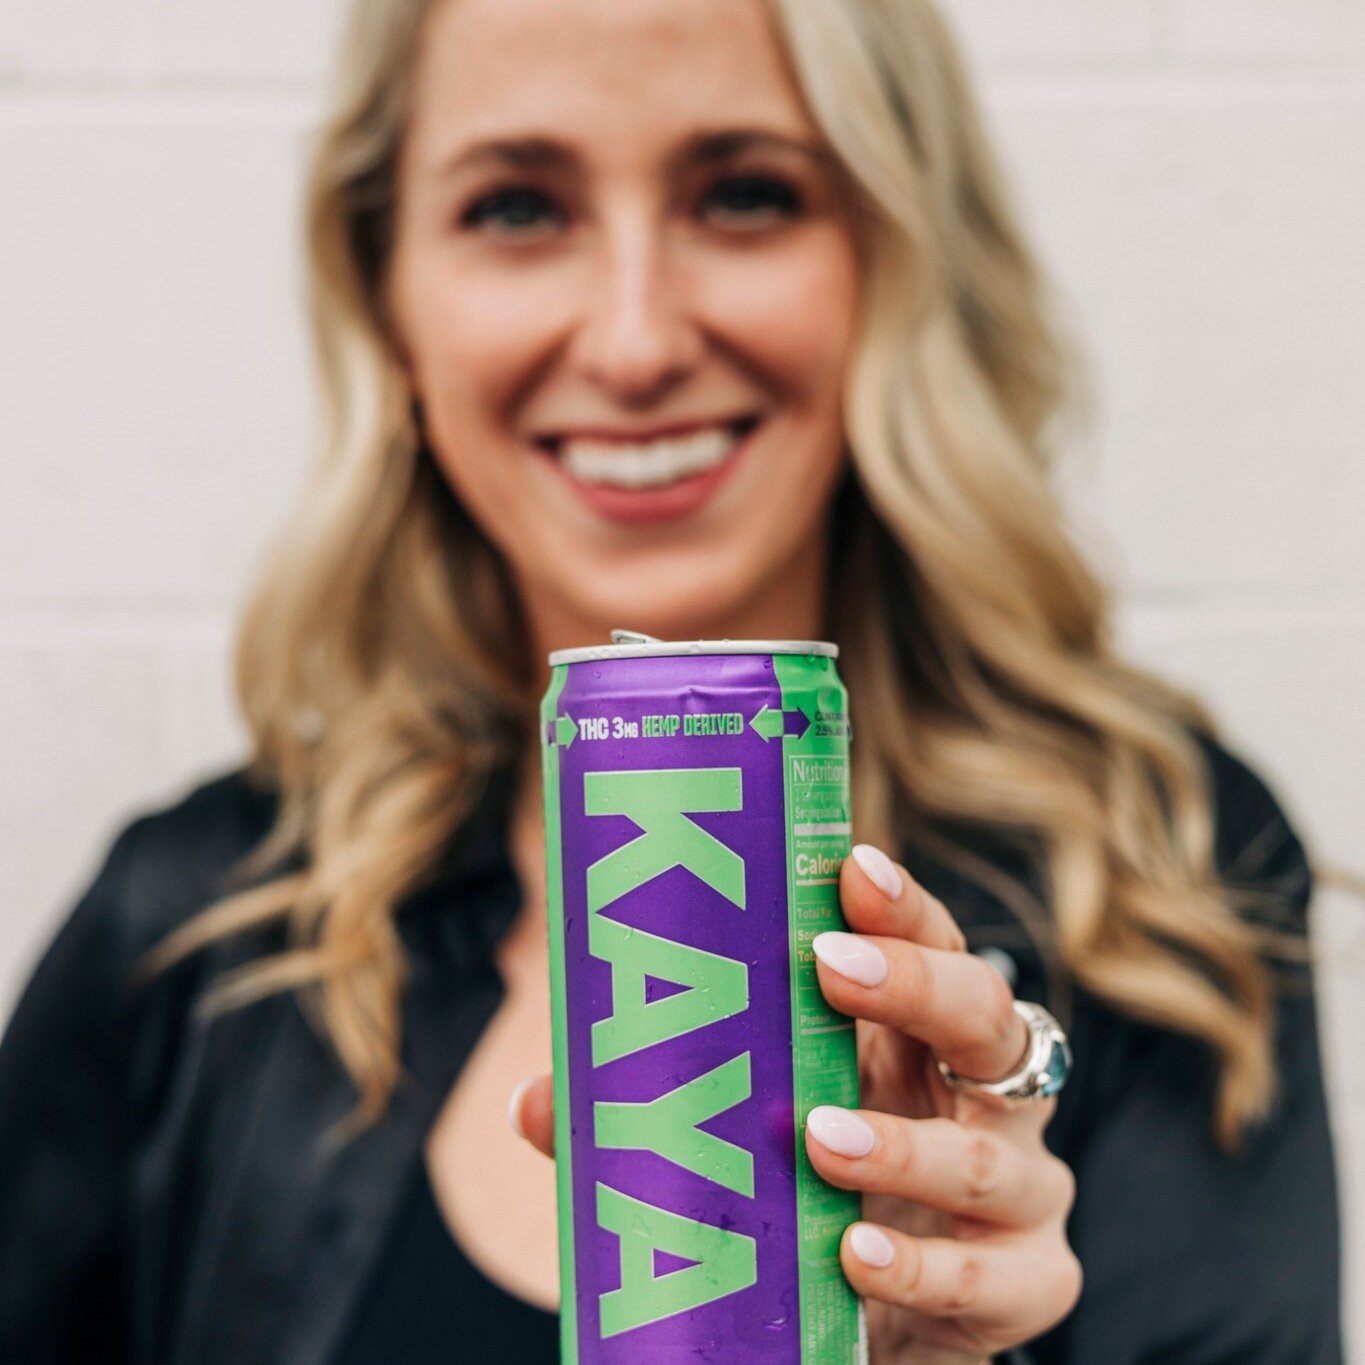 All smiles for kaya on this lovely afternoon. Kaya calm today and every day. 
#DrinkKaya #AlcoholFree #Wellness #FueledByTHC #SoberCurious #CannaCurious